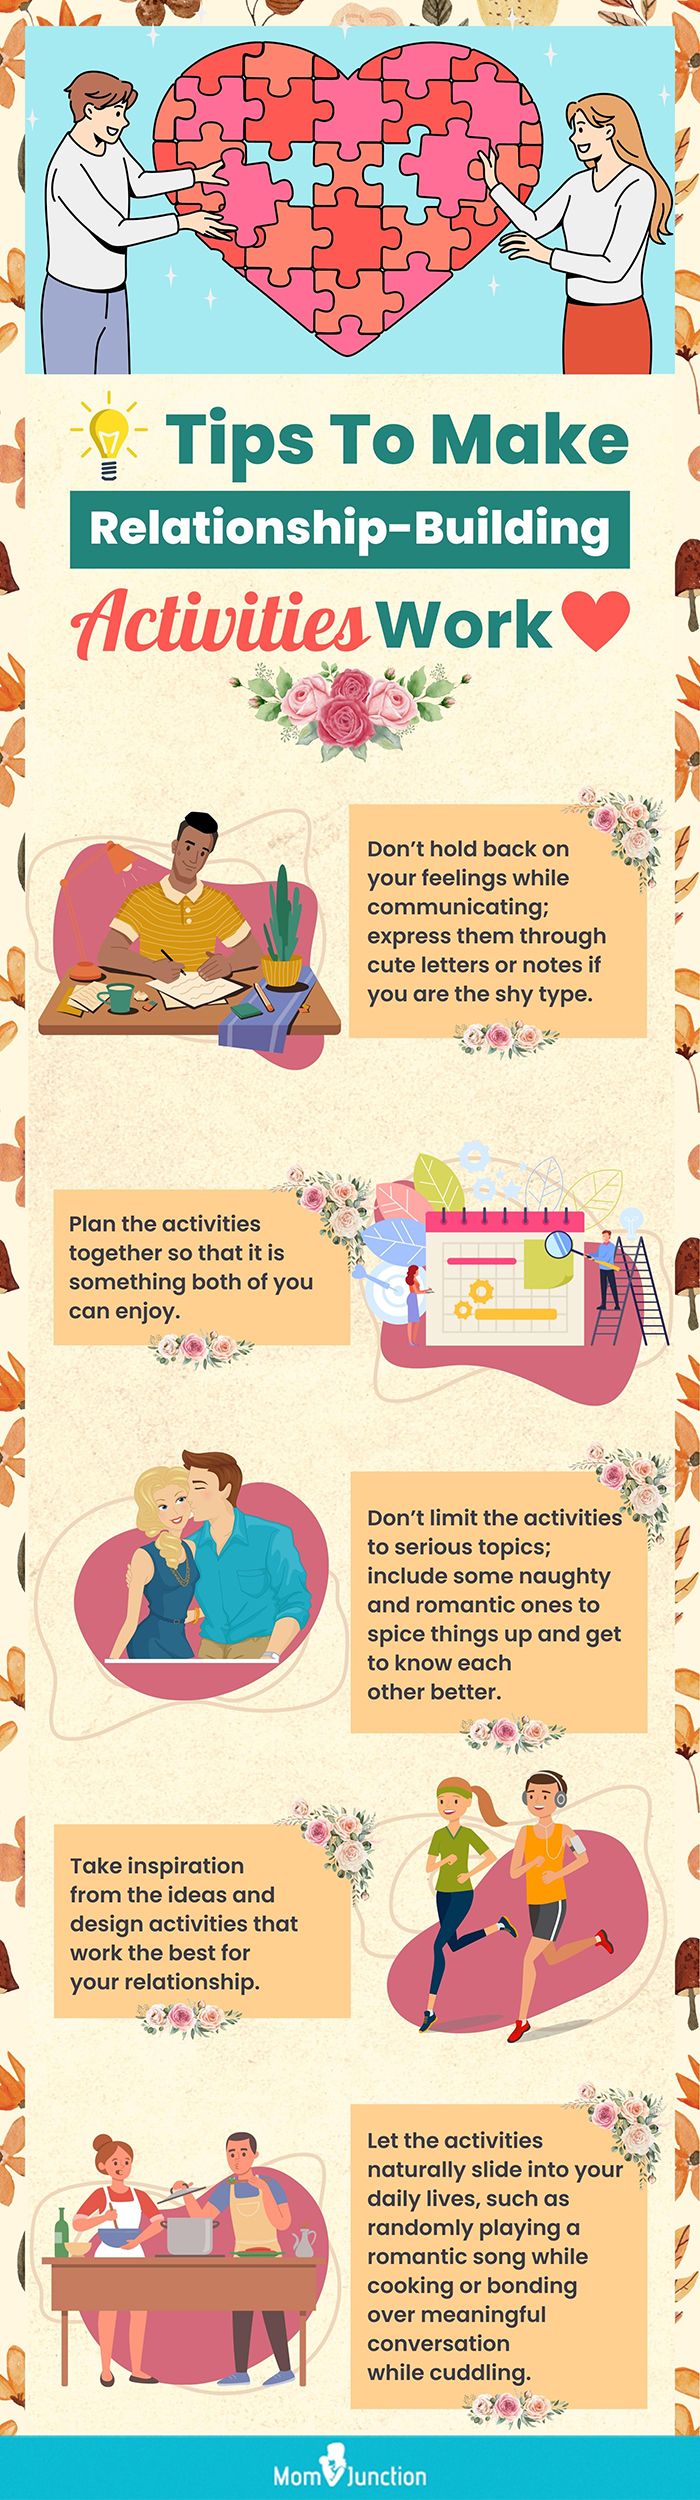 activities to strengthen your relationship [infographic]